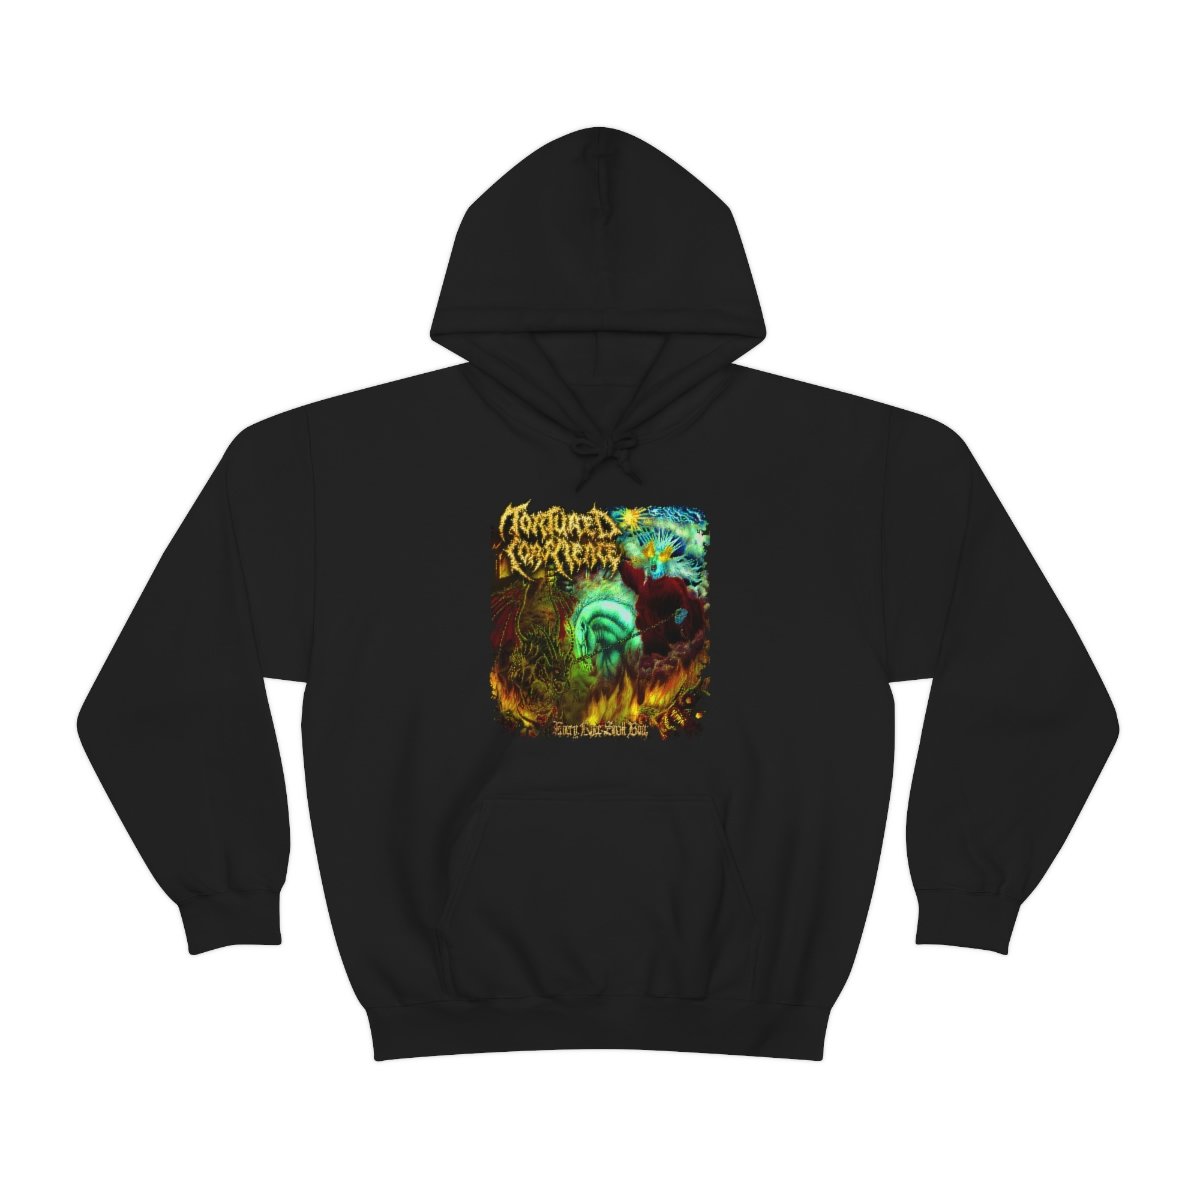 Tortured Conscience – Every Knee Shall Bow Pullover Hooded Sweatshirt